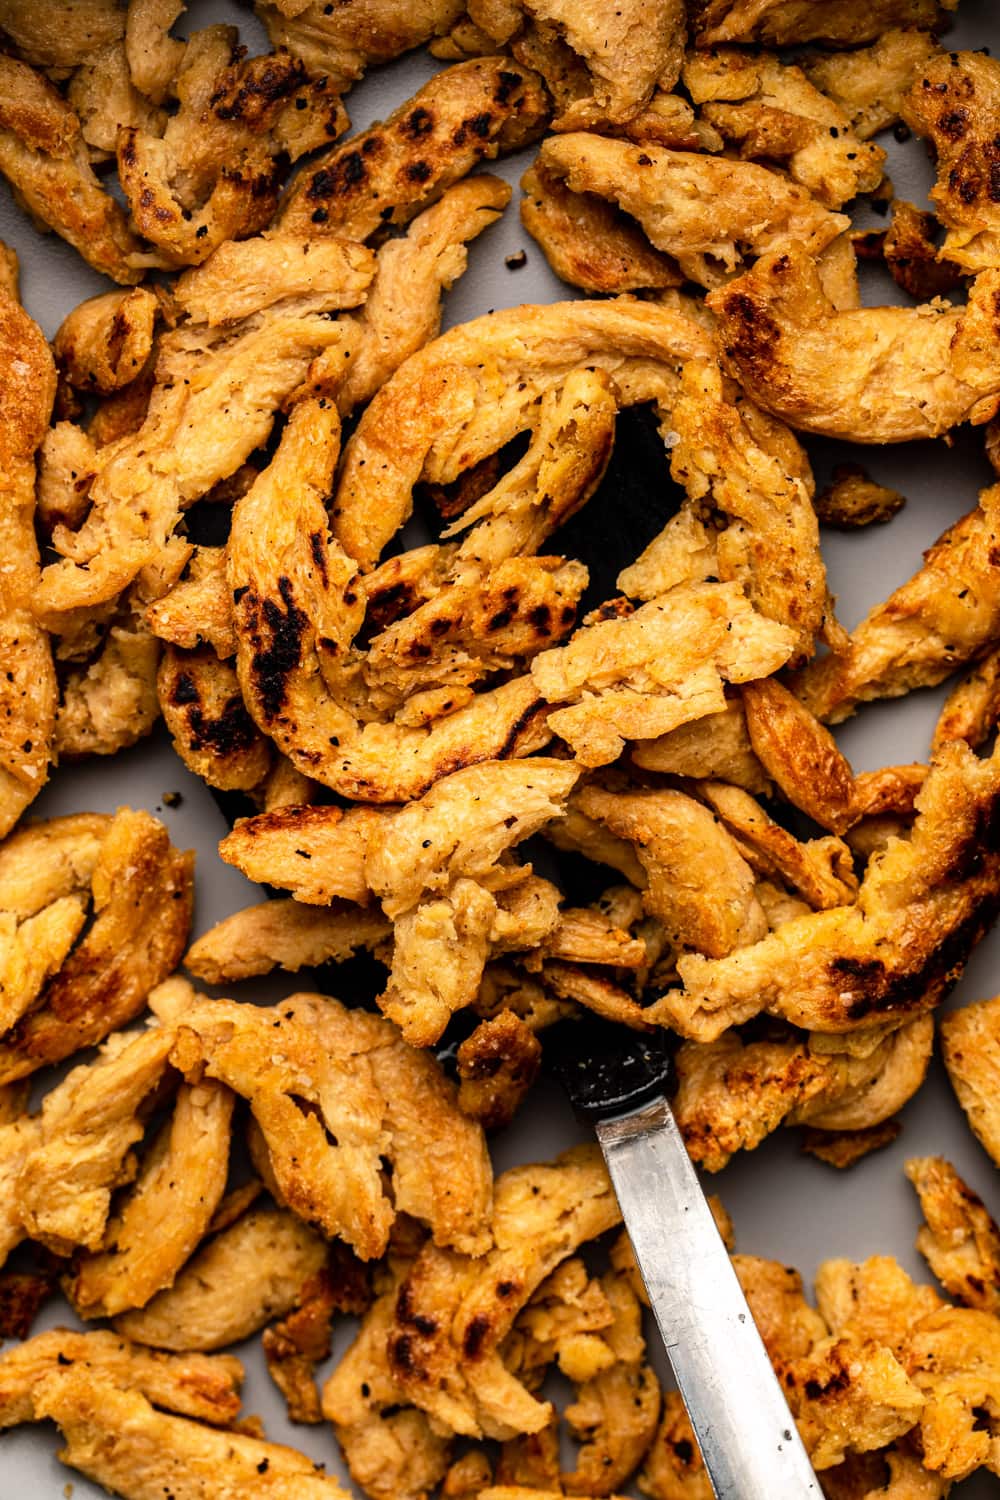 a zoomed in image of freshly cooked soy curls